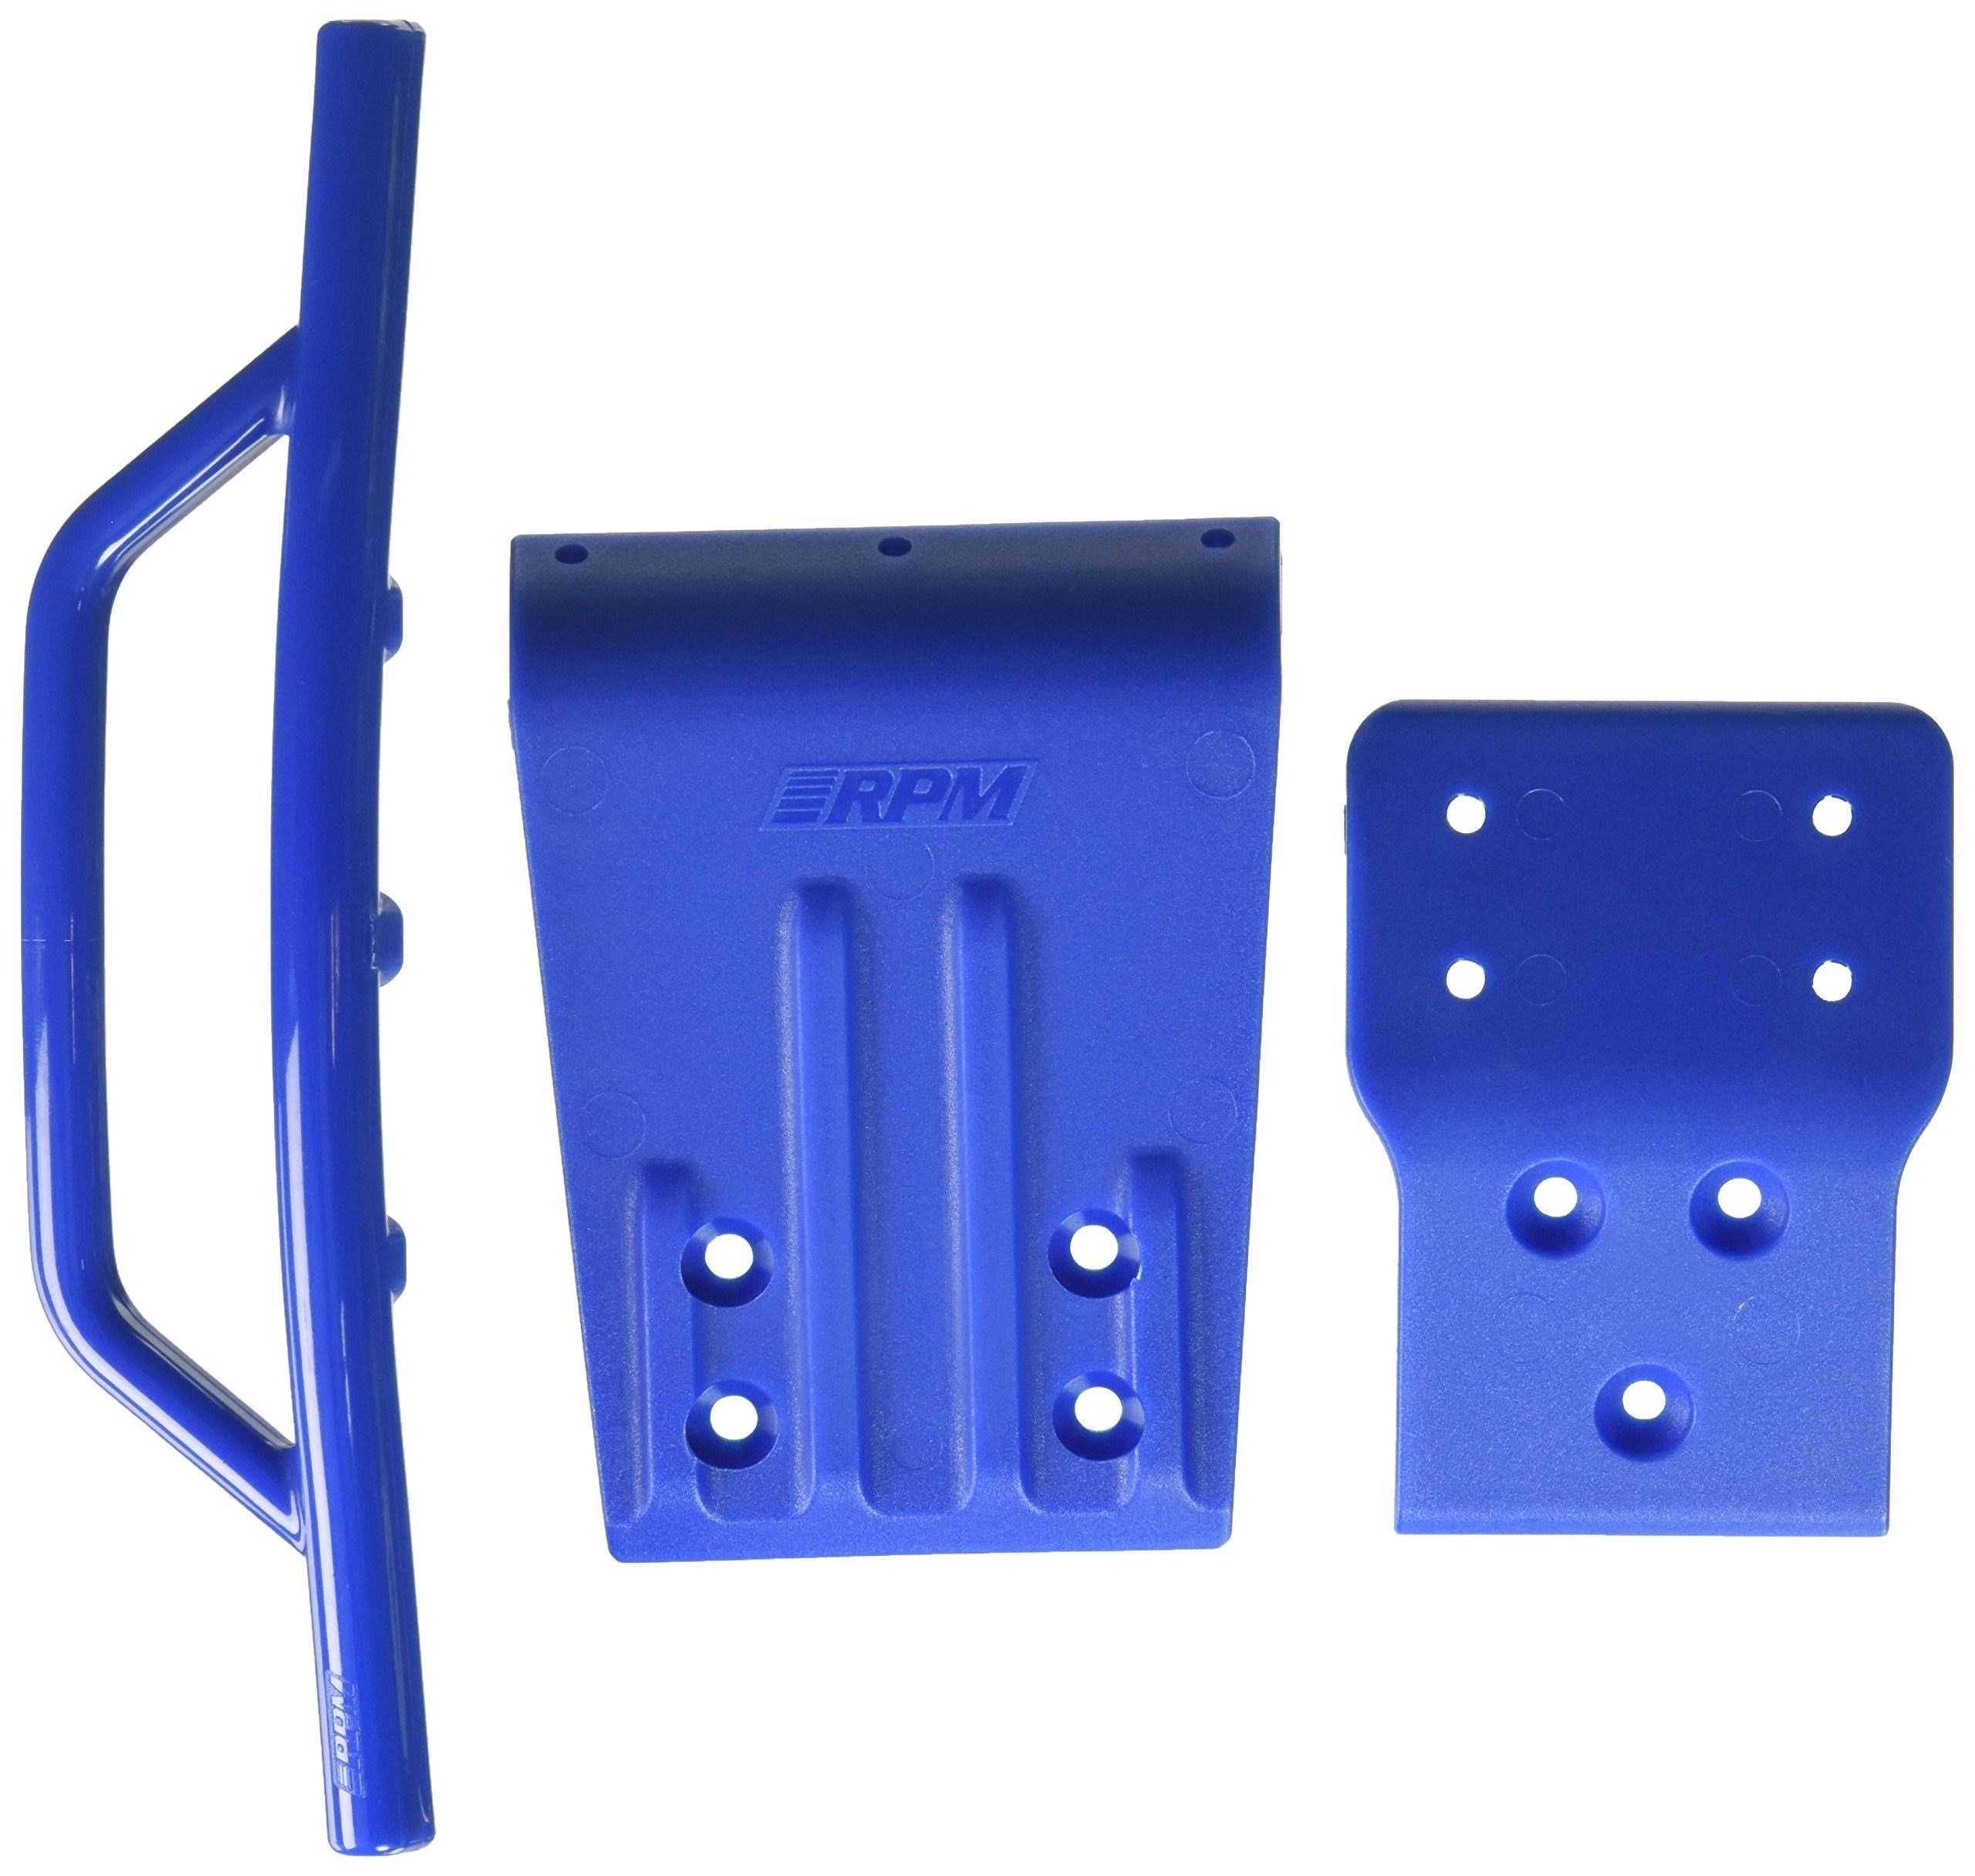 RPM Traxxas Slash Front Bumper and Skid Plate - Blue, 4x4